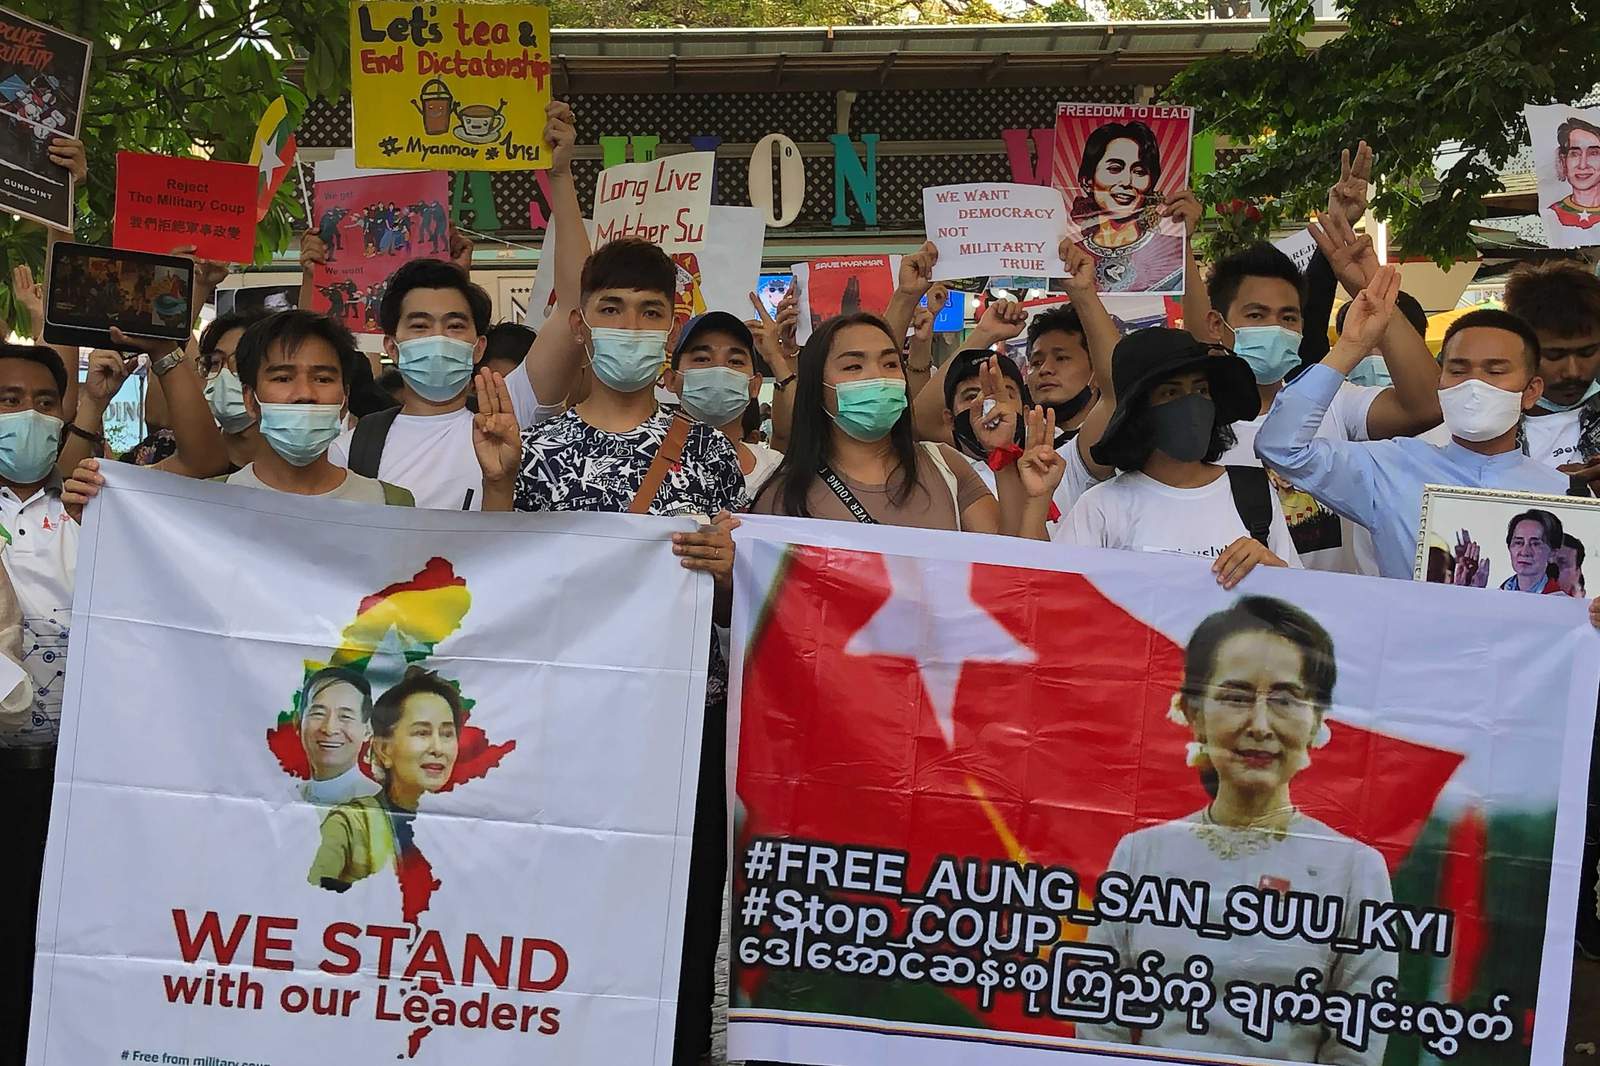 Thai marchers link their democracy cause to Myanmar protests